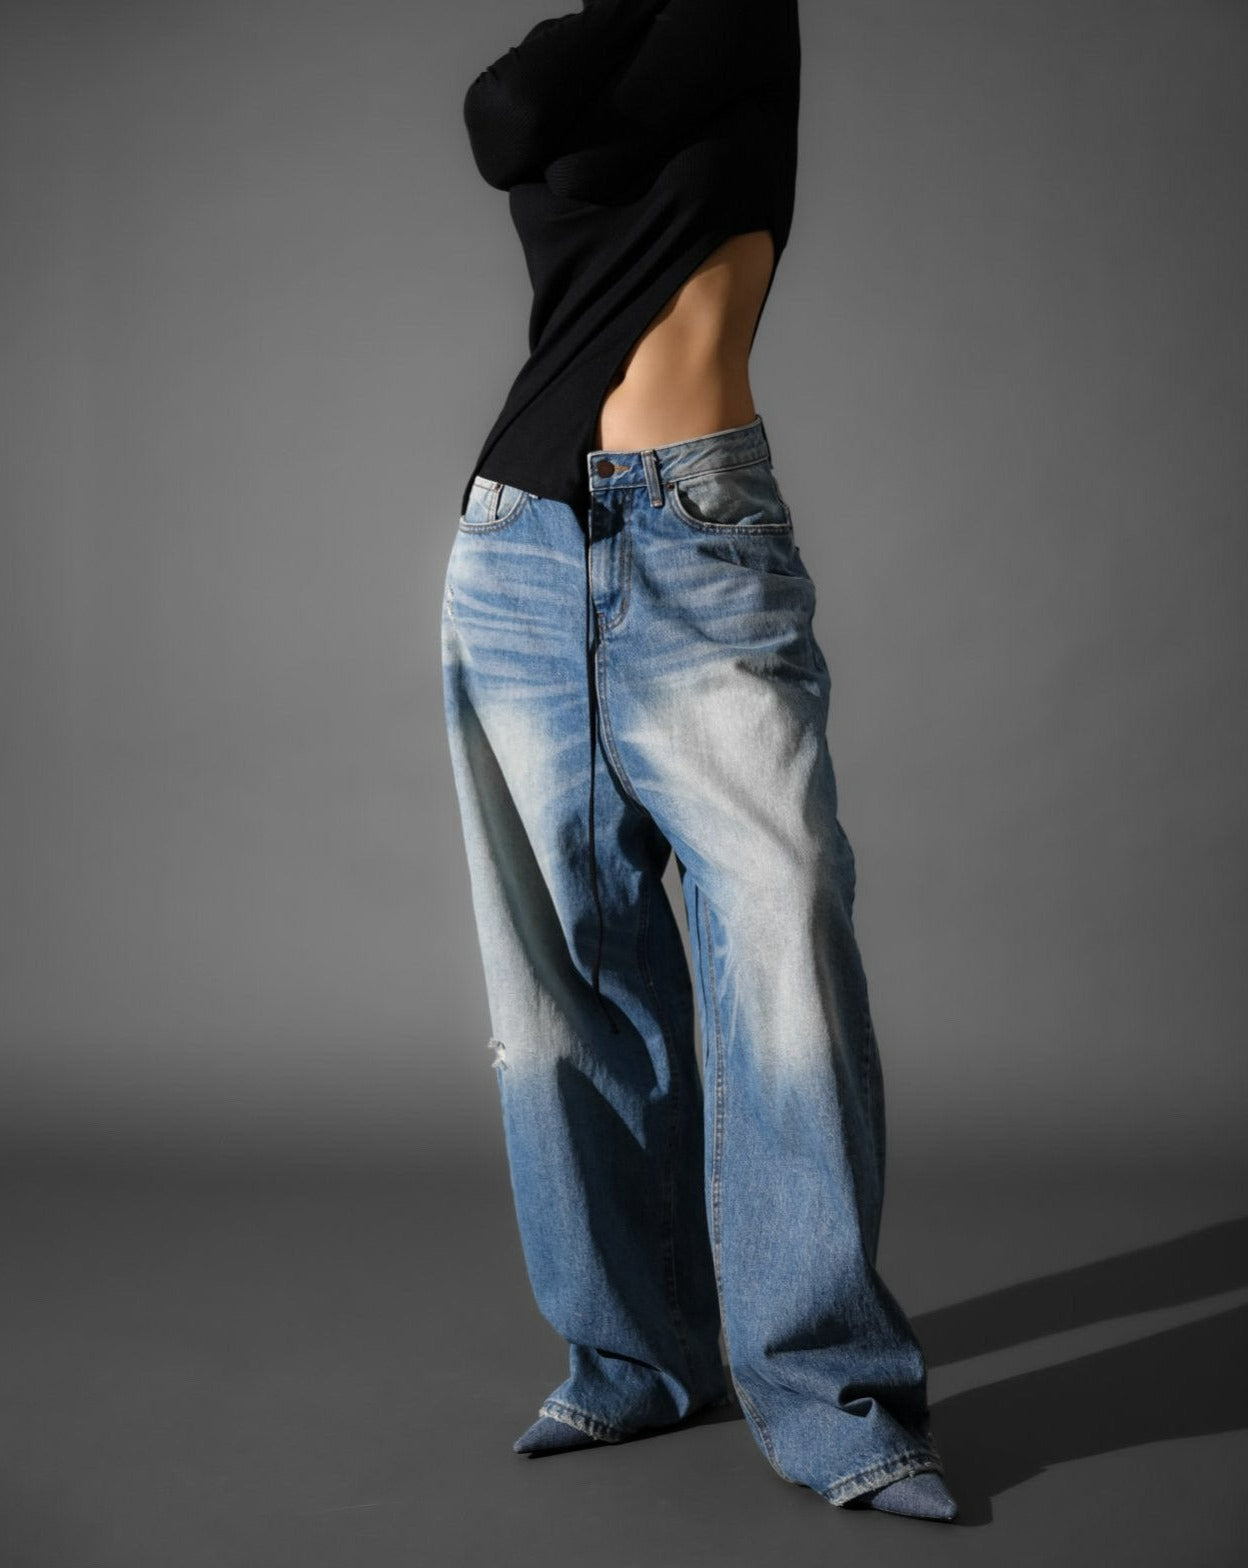 【PAPERMOON 페이퍼 문】SS / Vintage Blue Distressed Damage Wash Wide-Leg Jeans